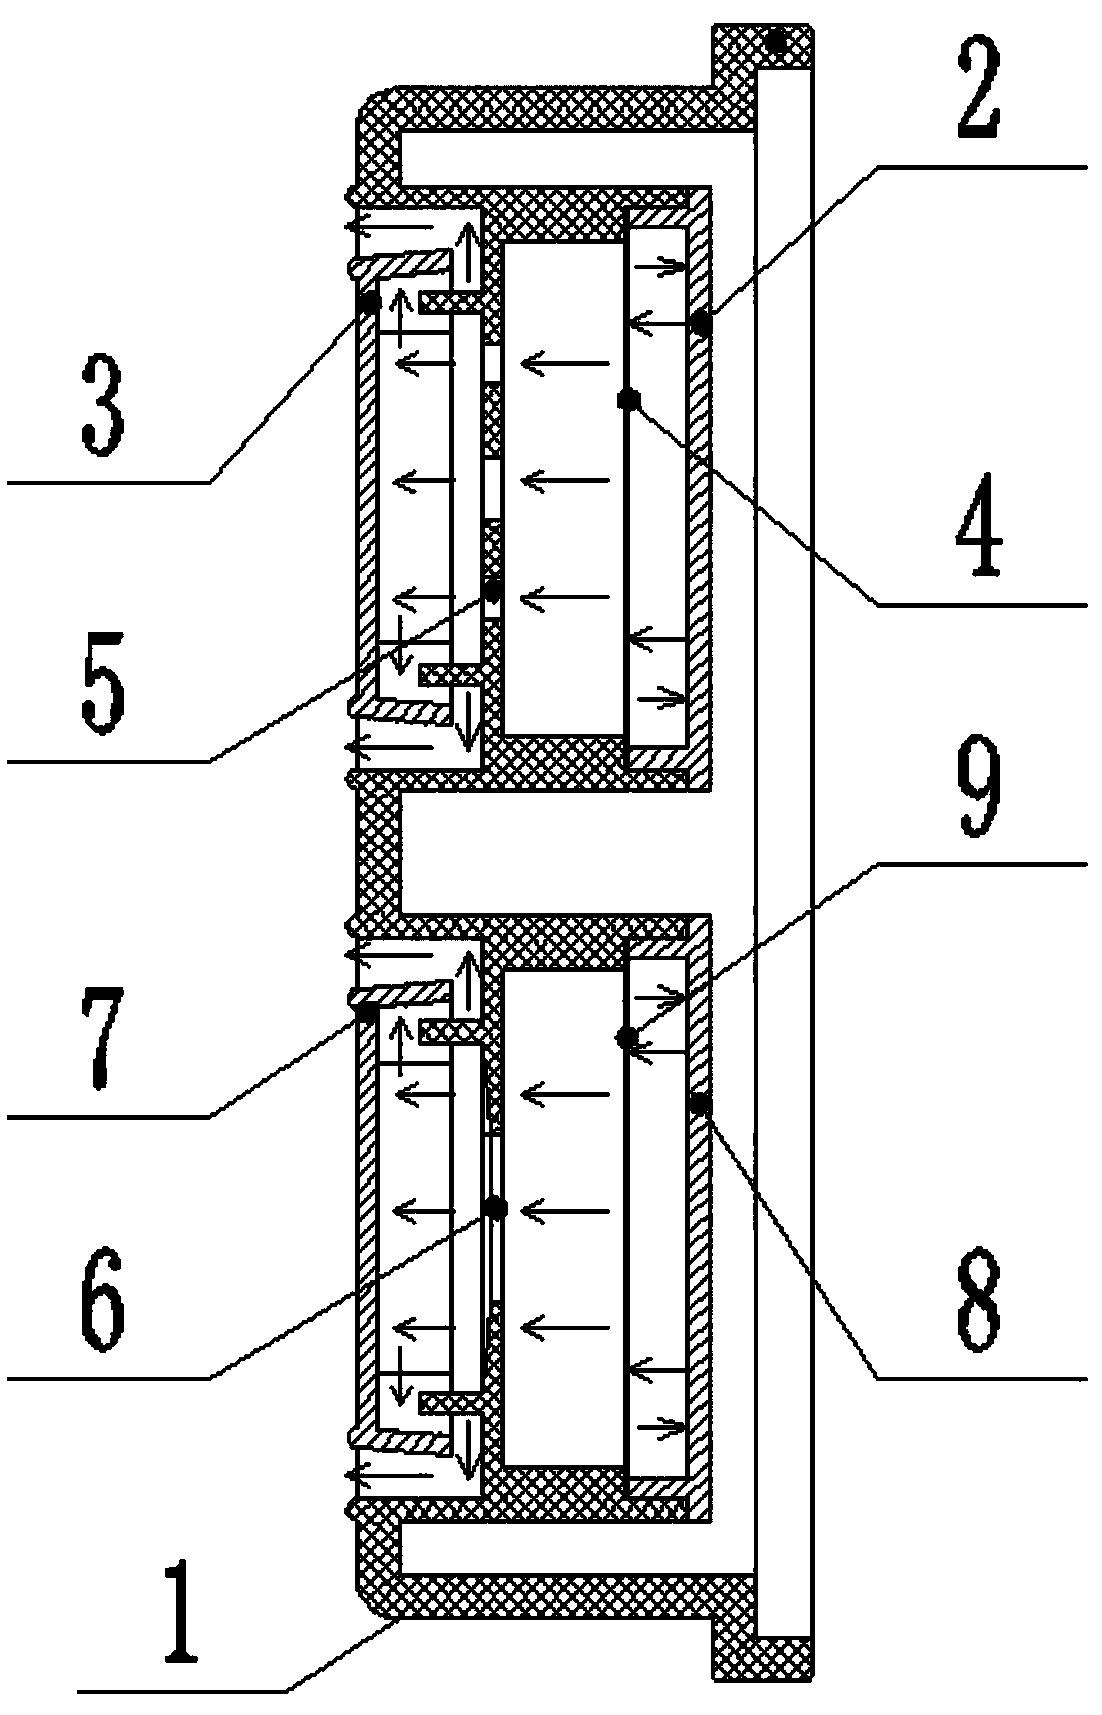 Sound generation inducing device and method for driving safety in harsh highway environment